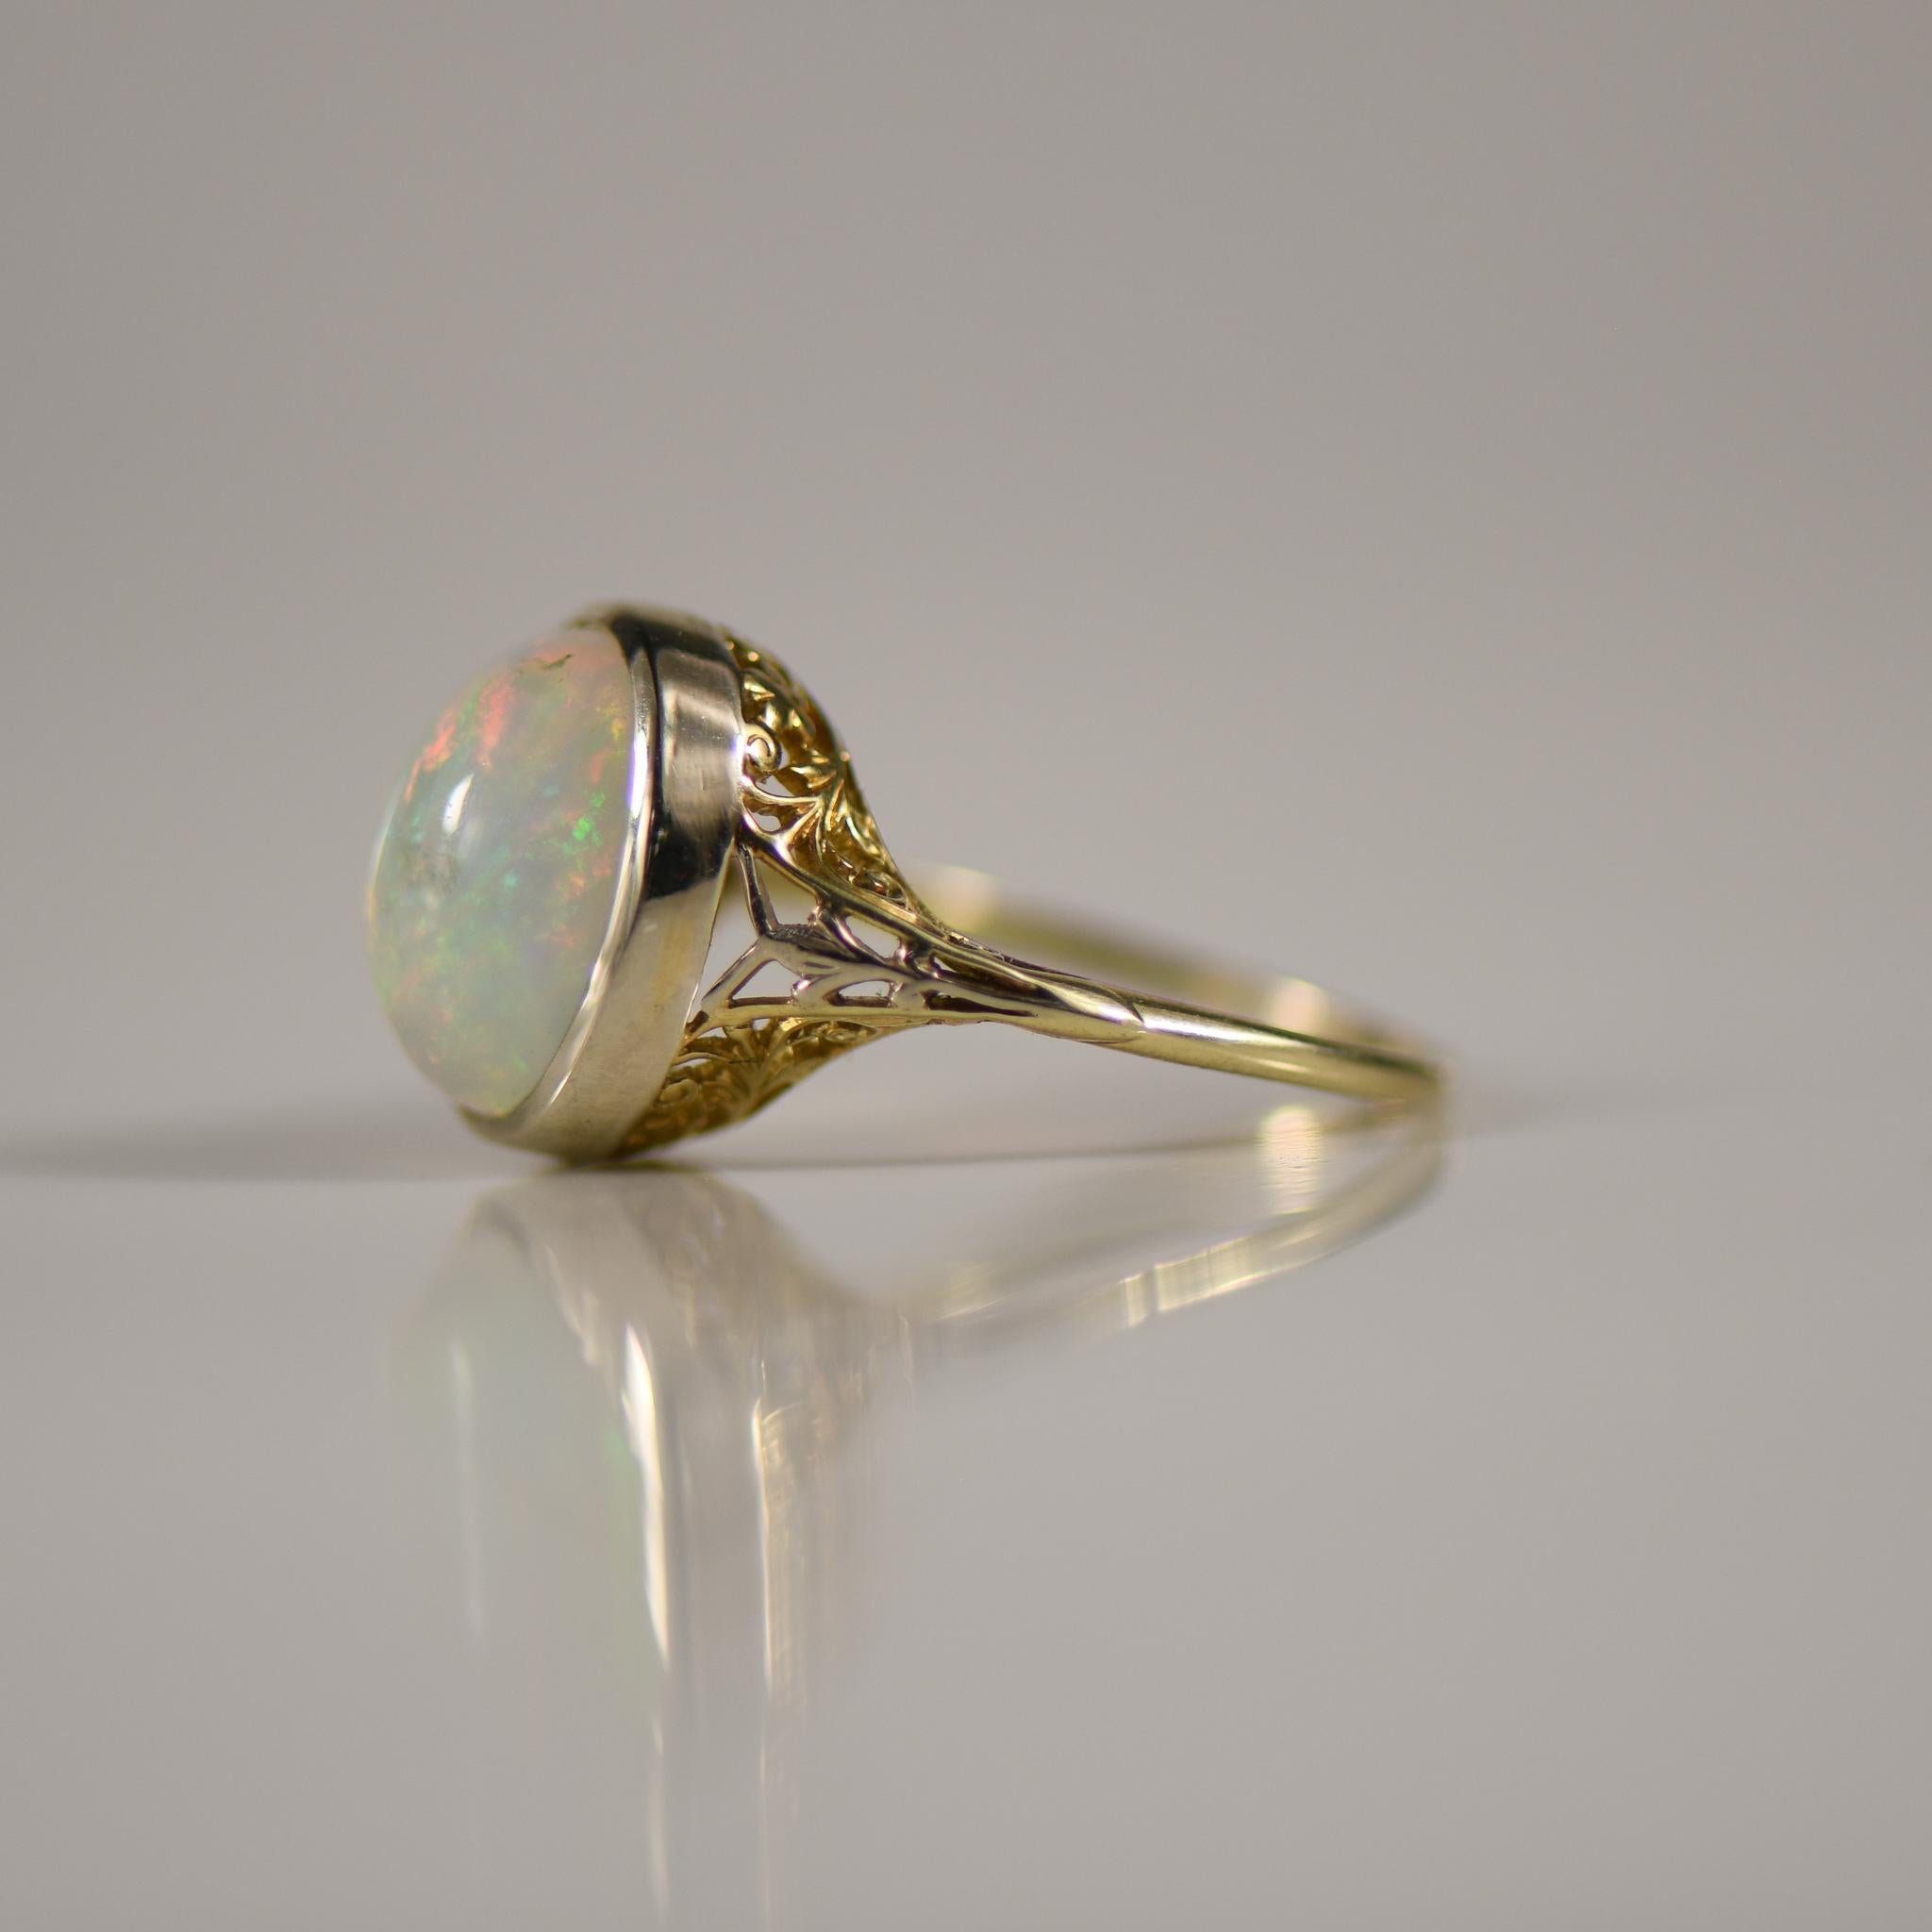 This piece is ethereal, the center opal has a subtle deep fire that lights up the stone with every twist and turn. Flashes or orange and green dance across this gem with ease. Delicately placed in a white gold bezel, the shanks with yellow gold